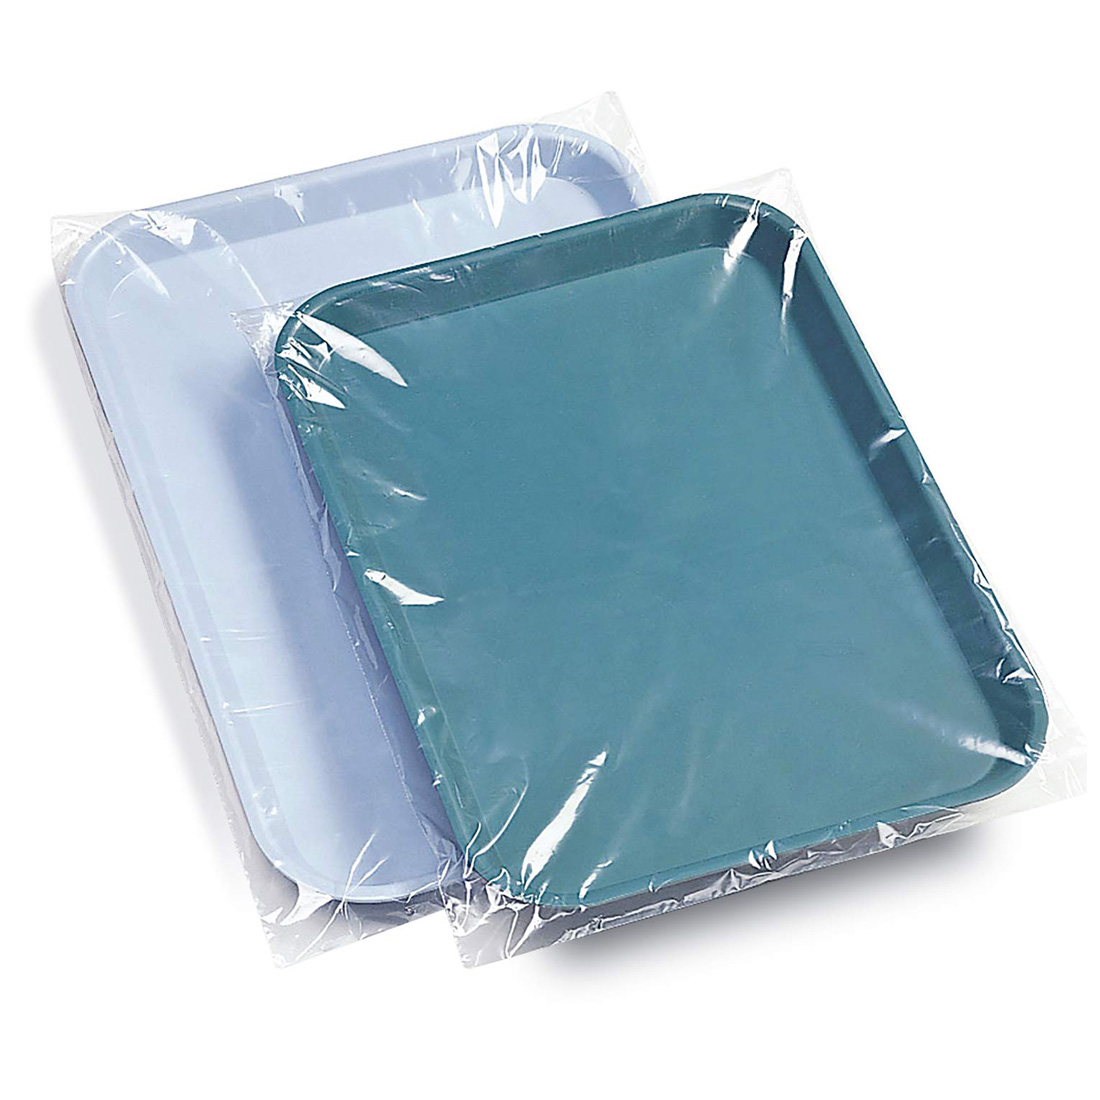 Tray Sleeves, Chayes/Size B Ritter, 11.625" x 14.5", Clear - 500/Box